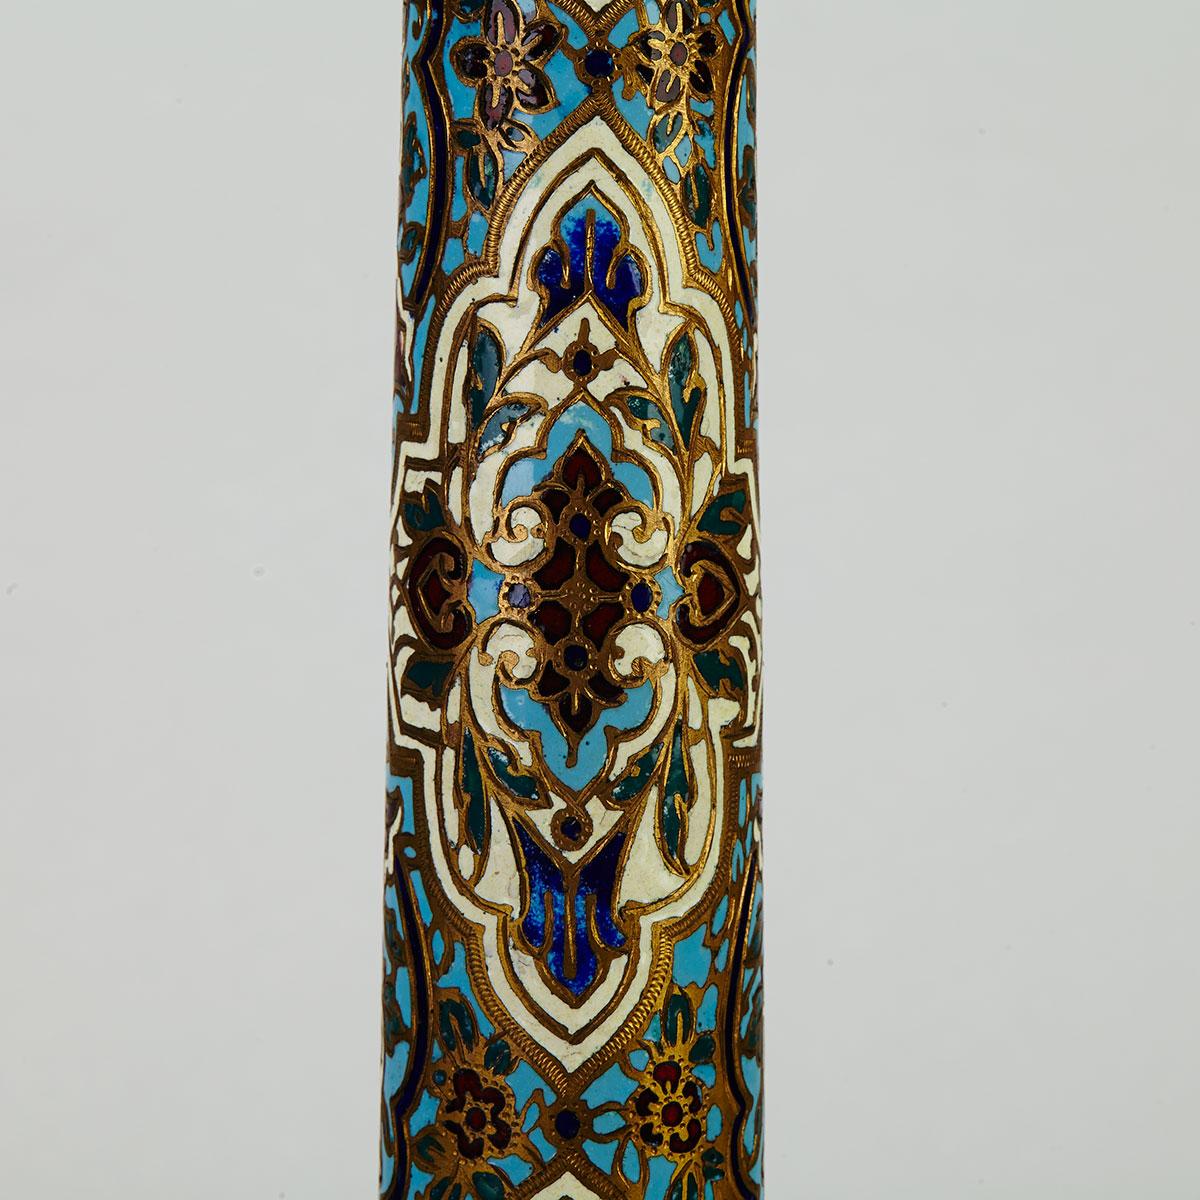 French Ormolu Mounted Champleve Enamelled Column Form Table Lamp, early 20th century